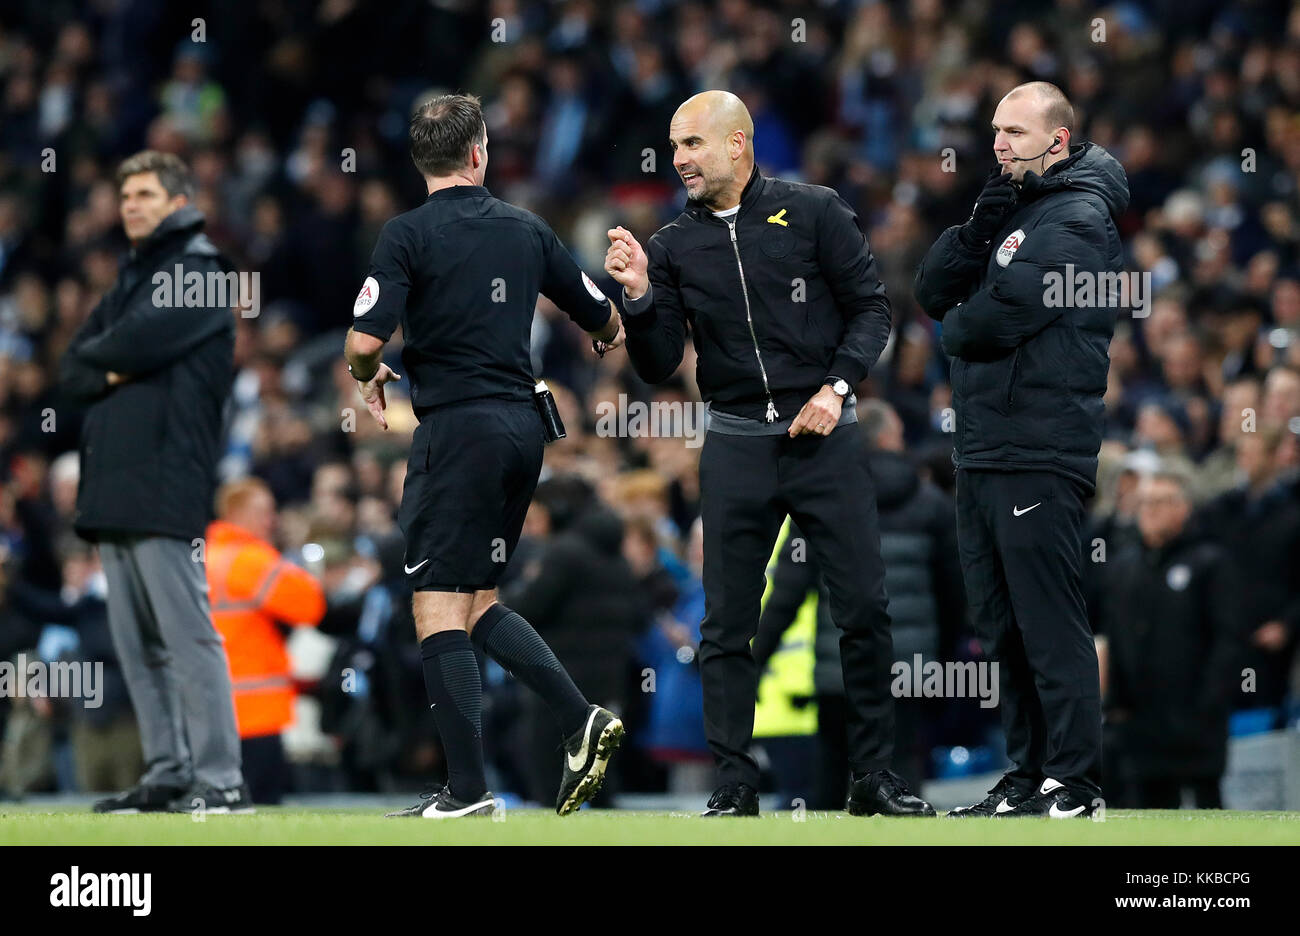 Manchester City manager Pep Guardiola (centre) is spoken to by referee Paul Tierney after his post-goal celebration following their second goal during the Premier League match at the Etihad Stadium, Manchester. Stock Photo